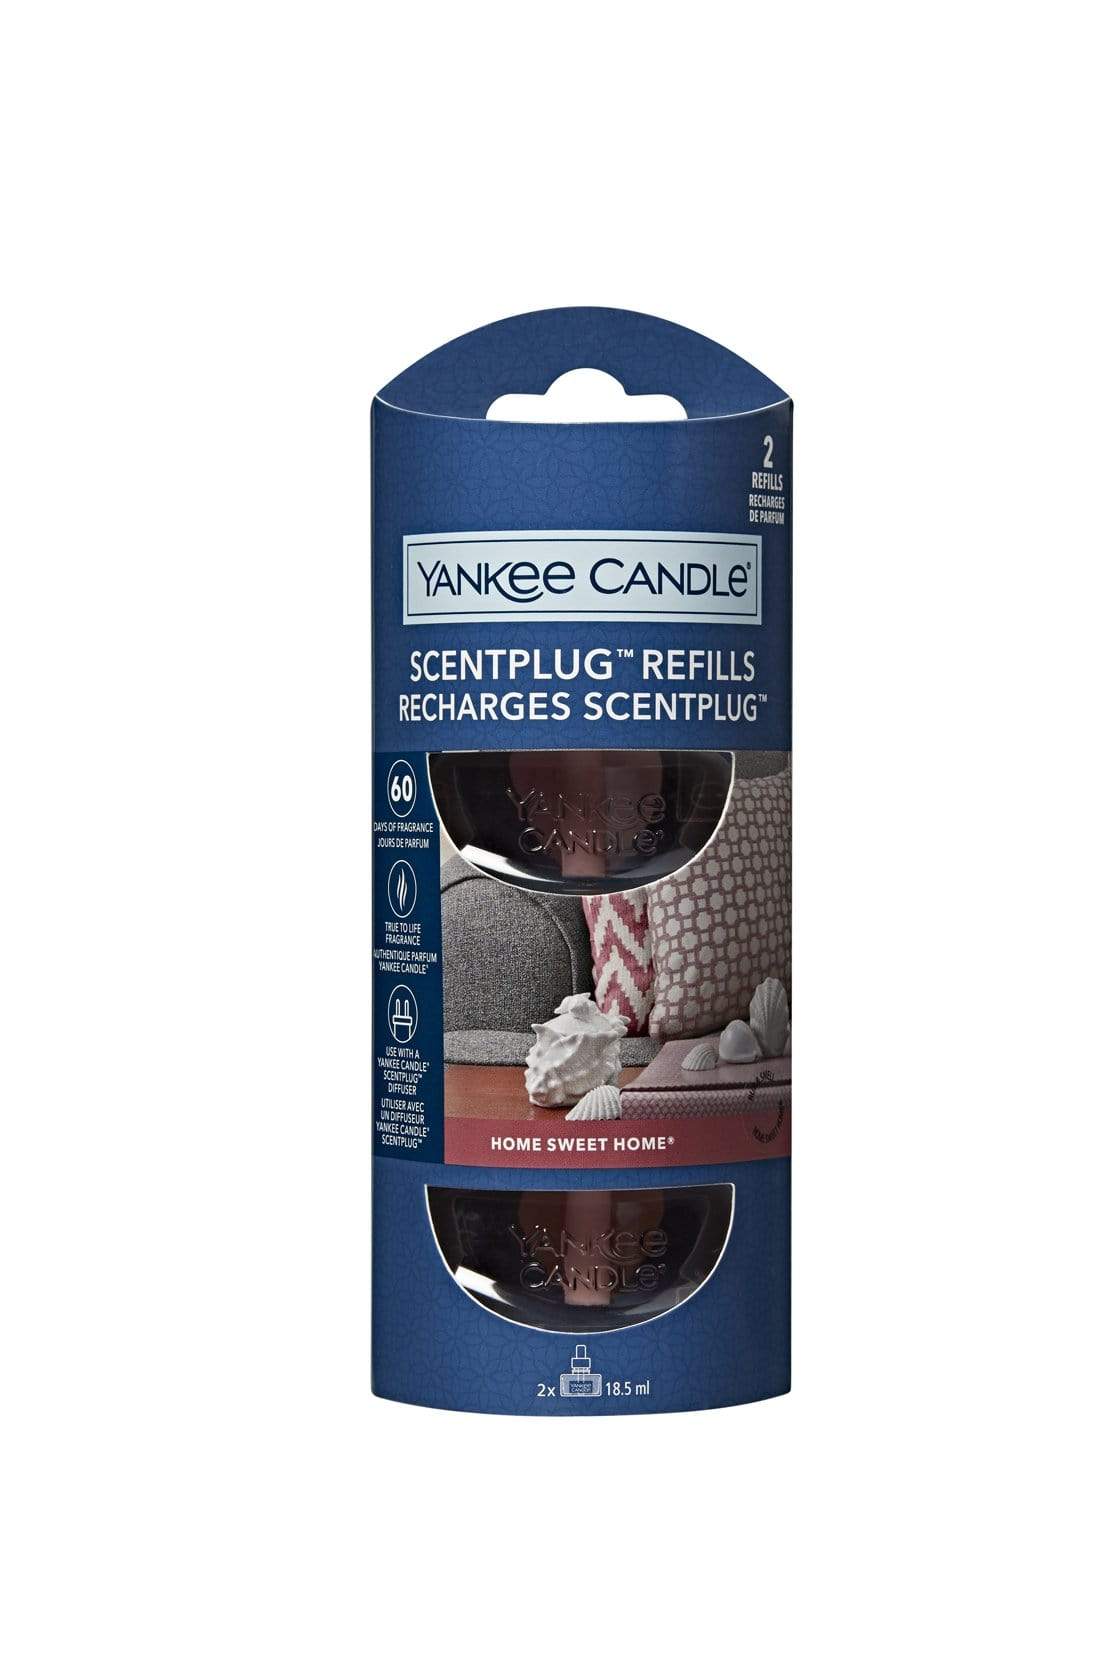 Yankee Candle Plug In Refill Yankee Candle Scentplug Refill Twin Pack - Home Sweet Home